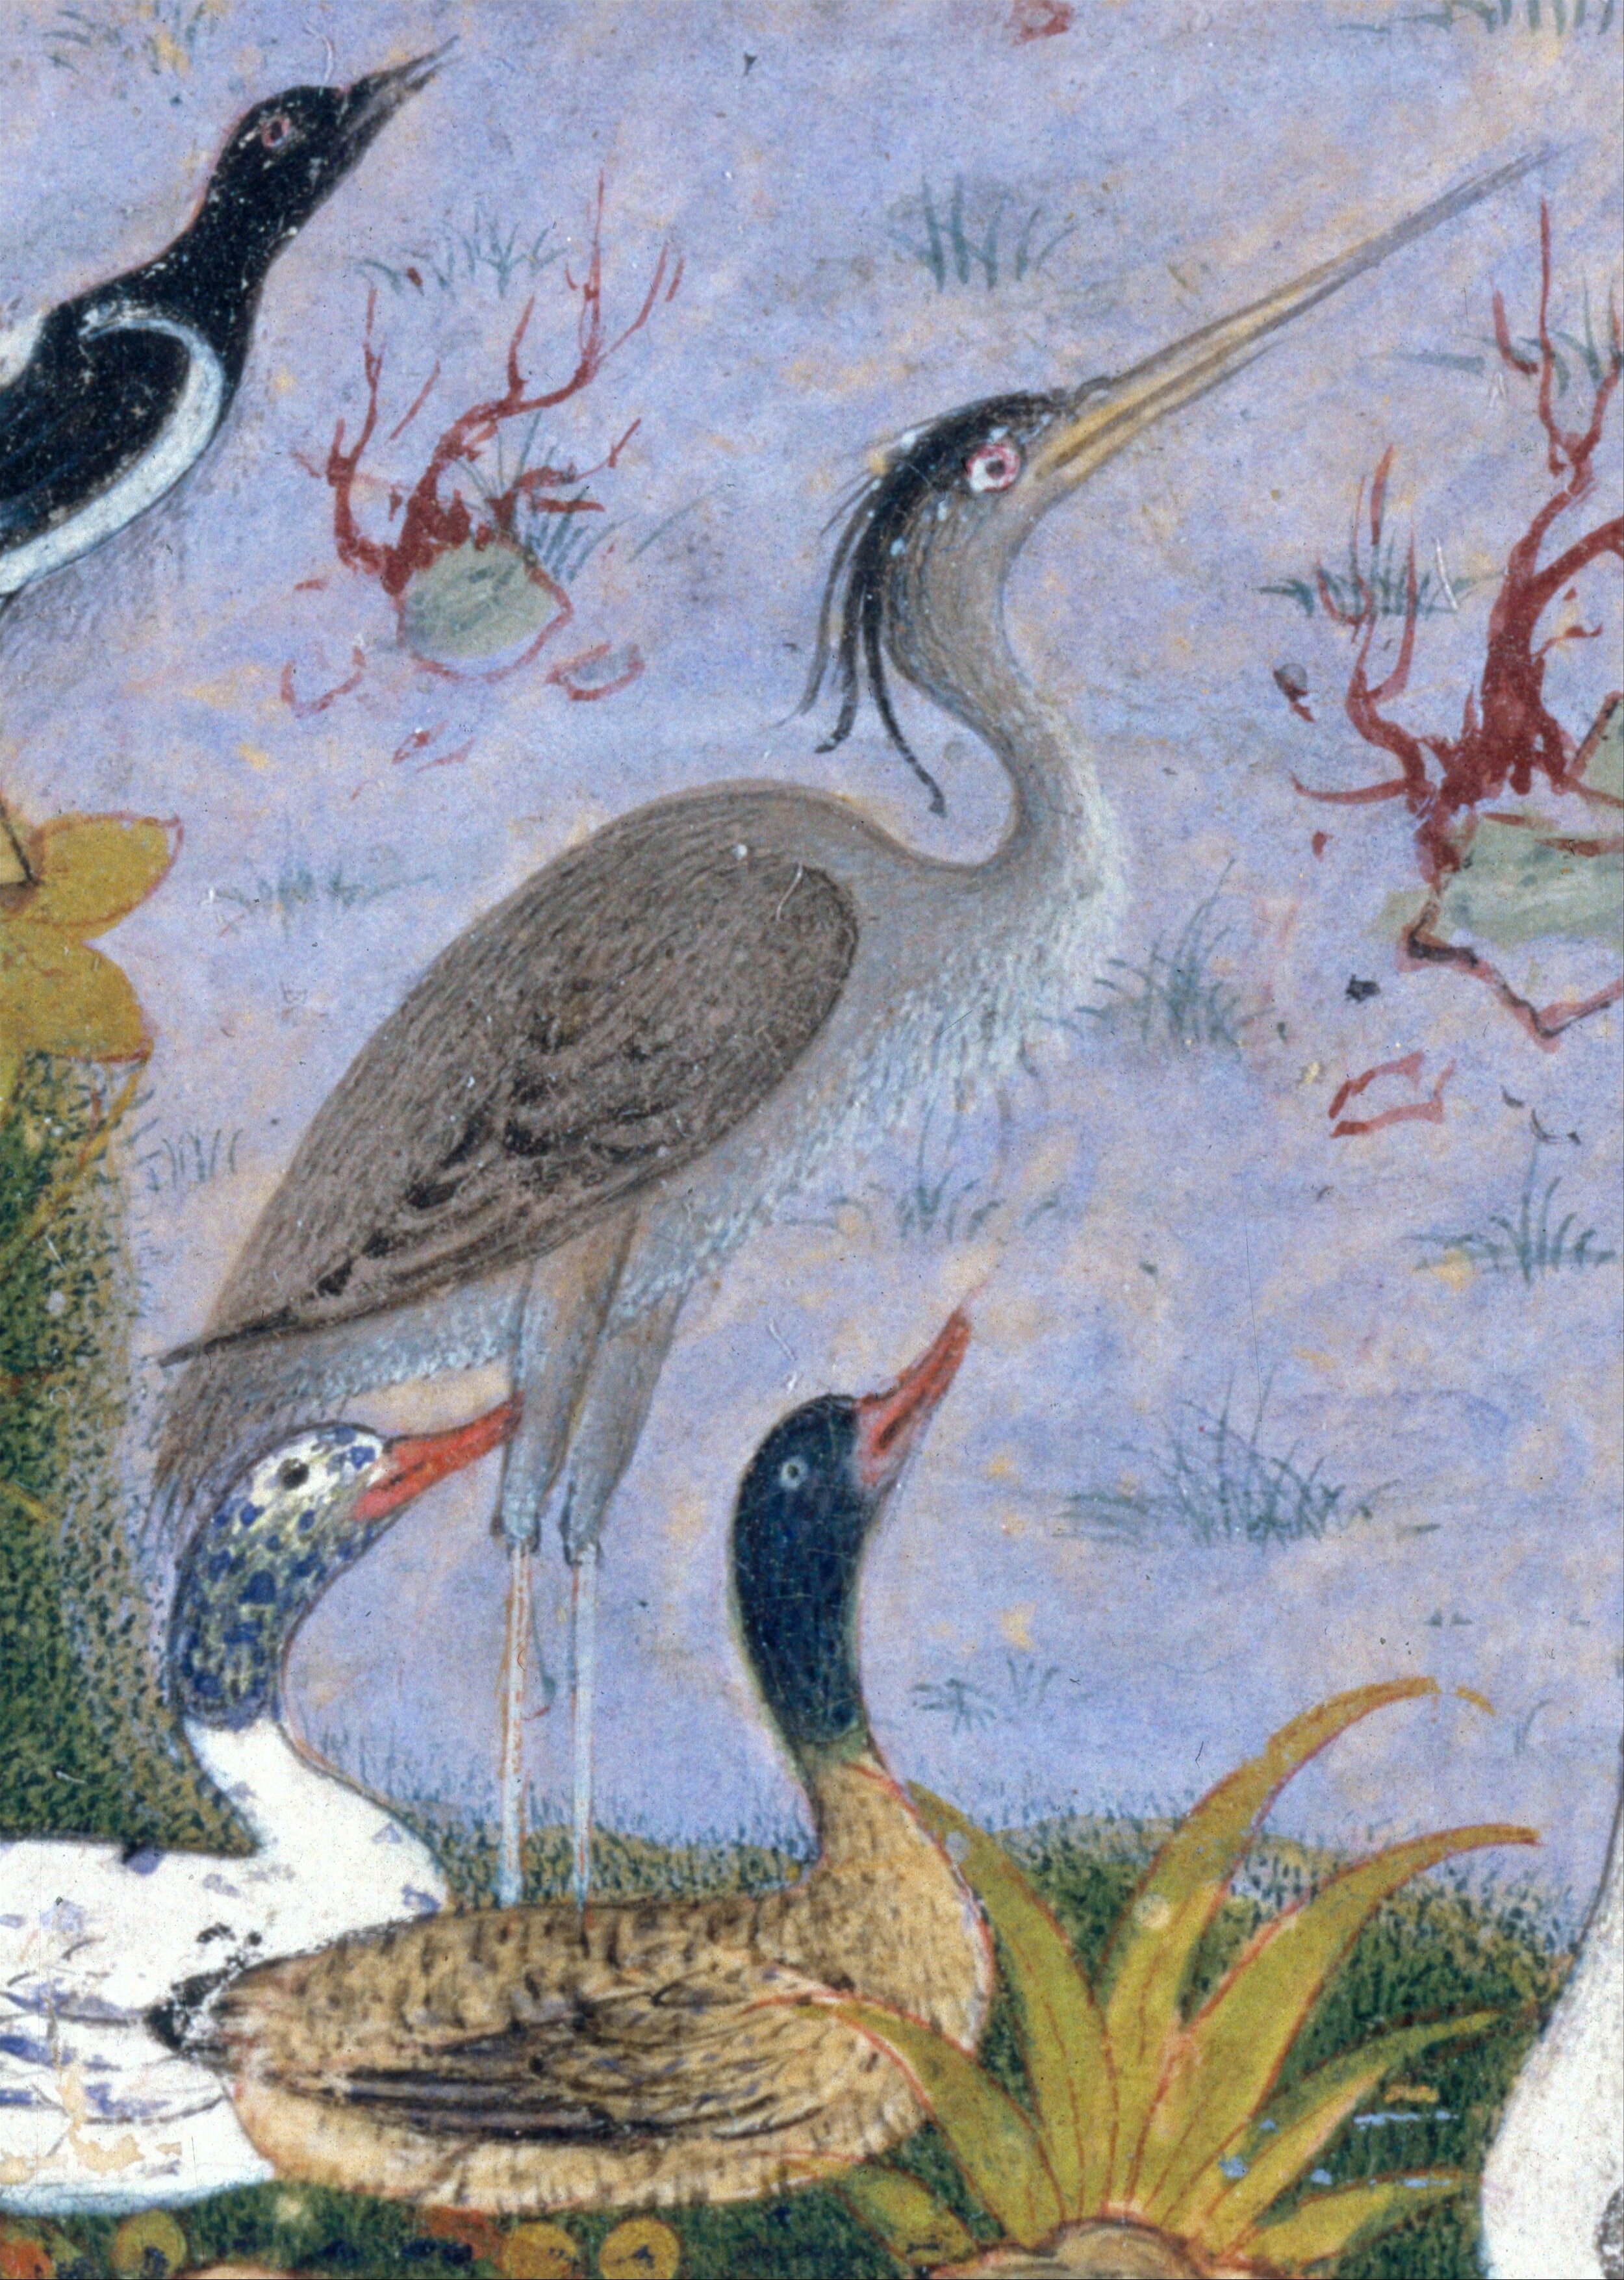 _The_Concourse_of_the_Birds_,_Folio_11r_from_a_Mantiq_al-tair_(Language_of_the_Birds)_MET_DT227736.jpg